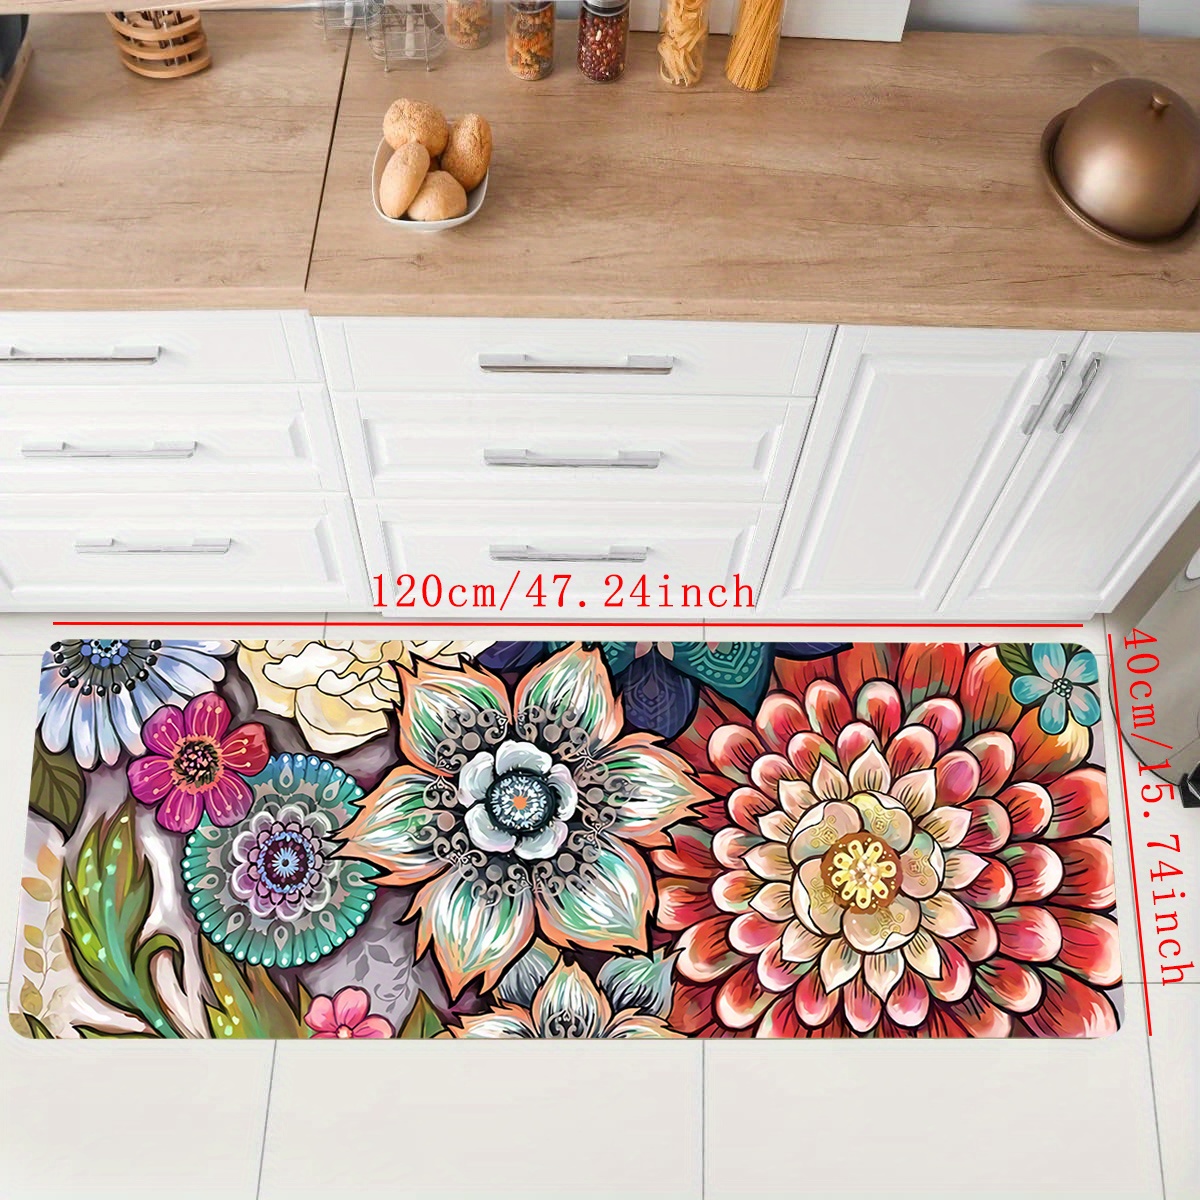  Sailground Kitchen Rugs, Bee and Small Daisies on Wood Kitchen  Rug, Ktchen Gadgets Anti-Fatigue Kitchen Mat, Floor Mats for Kitchen Decor  & Laundry Room Decor, 2PCS Runner Rug, Kitchen Mats for